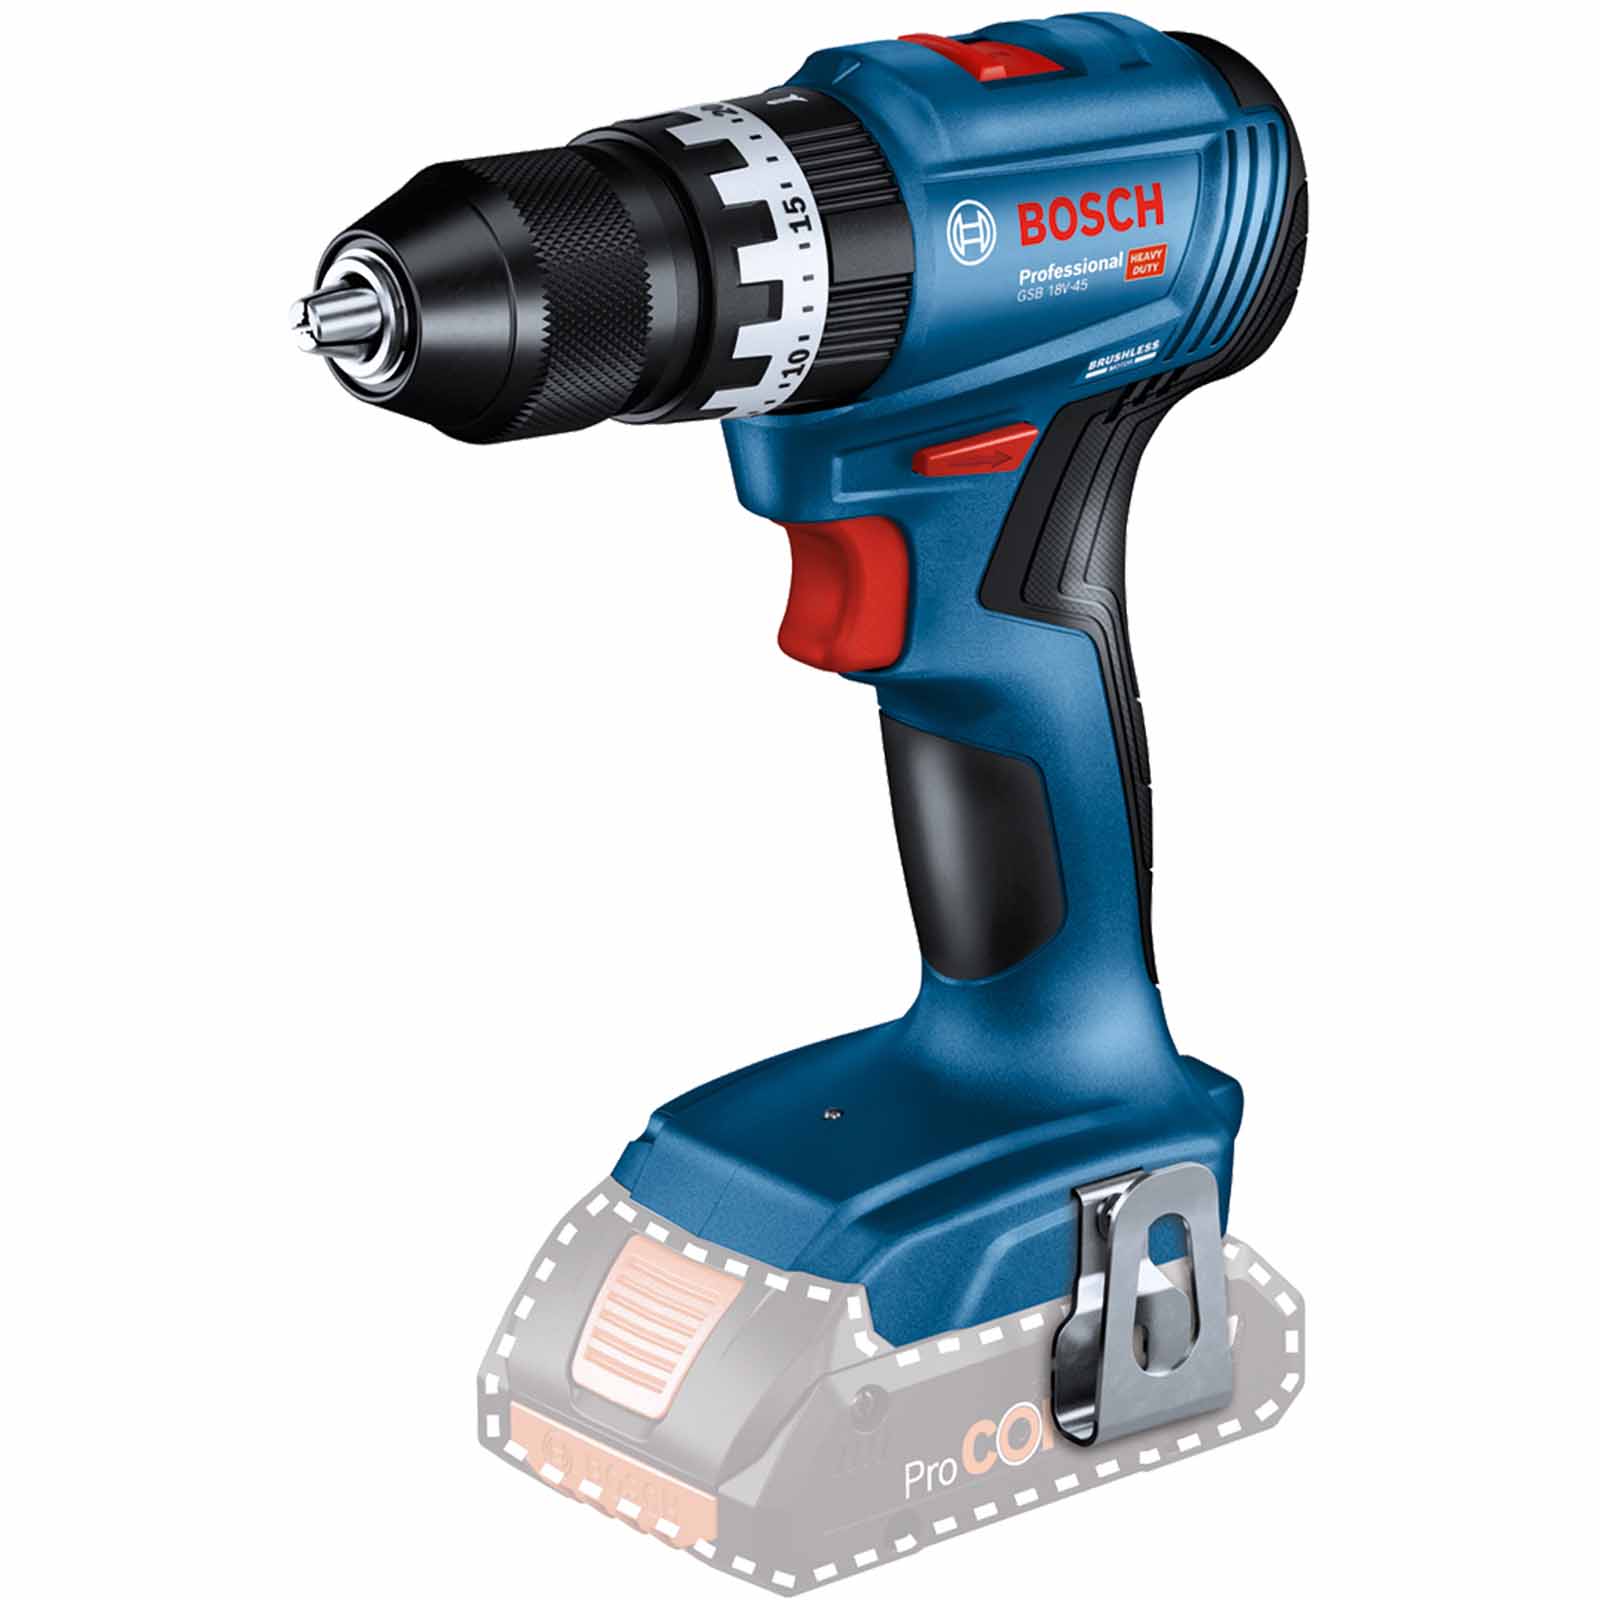 Bosch GSB 18V-45 18v Cordless Brushless Combi Drill No Batteries No Charger No Case